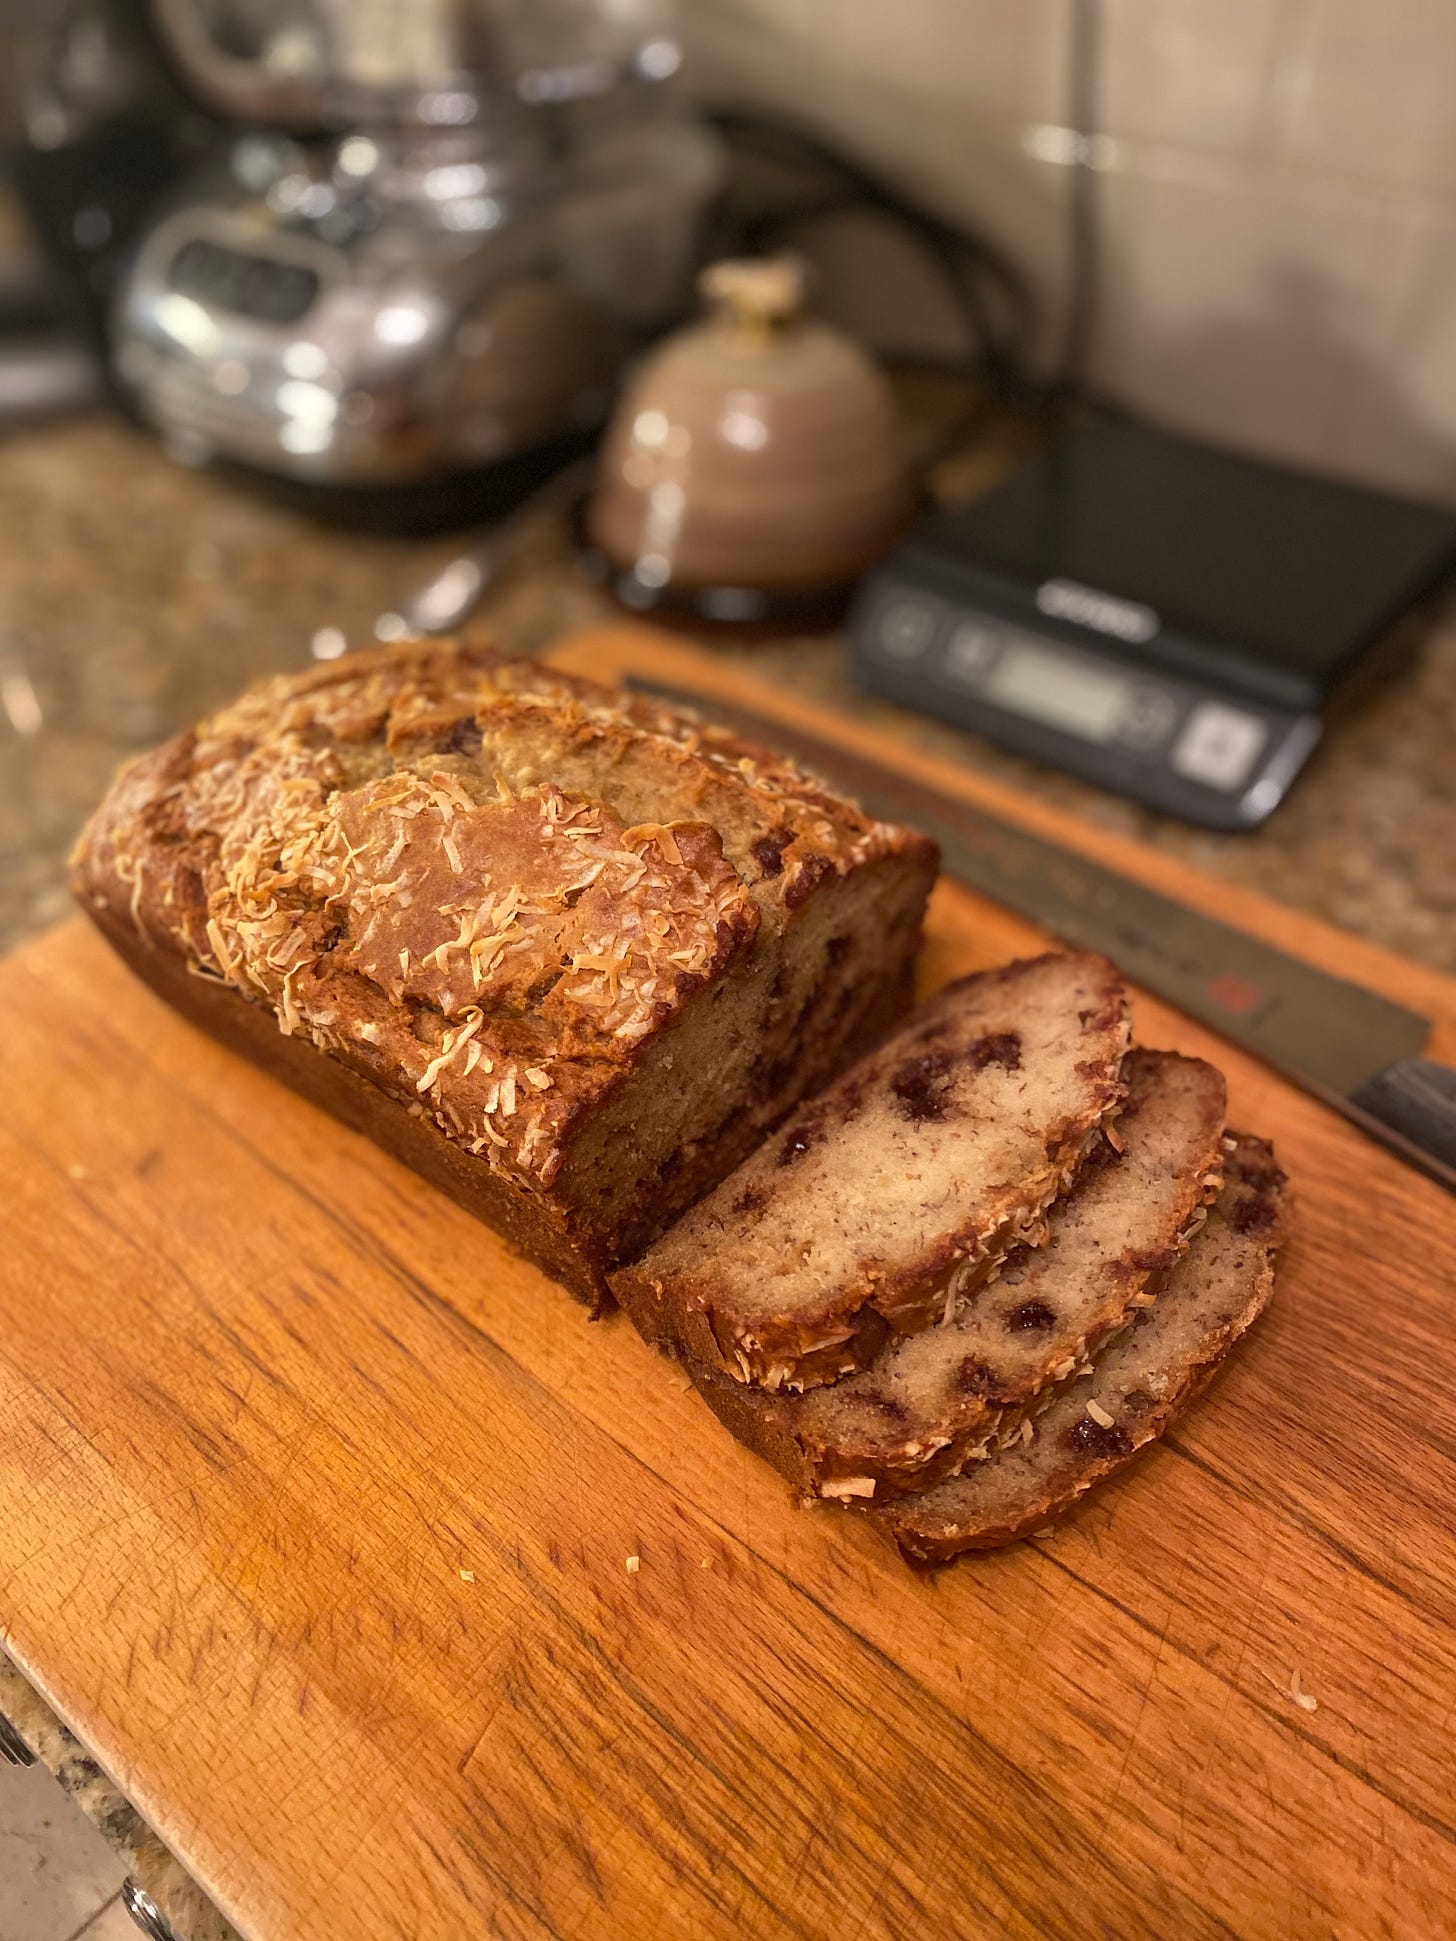 On a wood cutting board, a loaf of banana bread with a crisp-looking crust and a split across the top, baked-in coconut scattered over it. It's been sliced open so you can see the light colour inside, and the chocolate chips. Three slices tumble onto the cutting board in front, next to the bread knife.